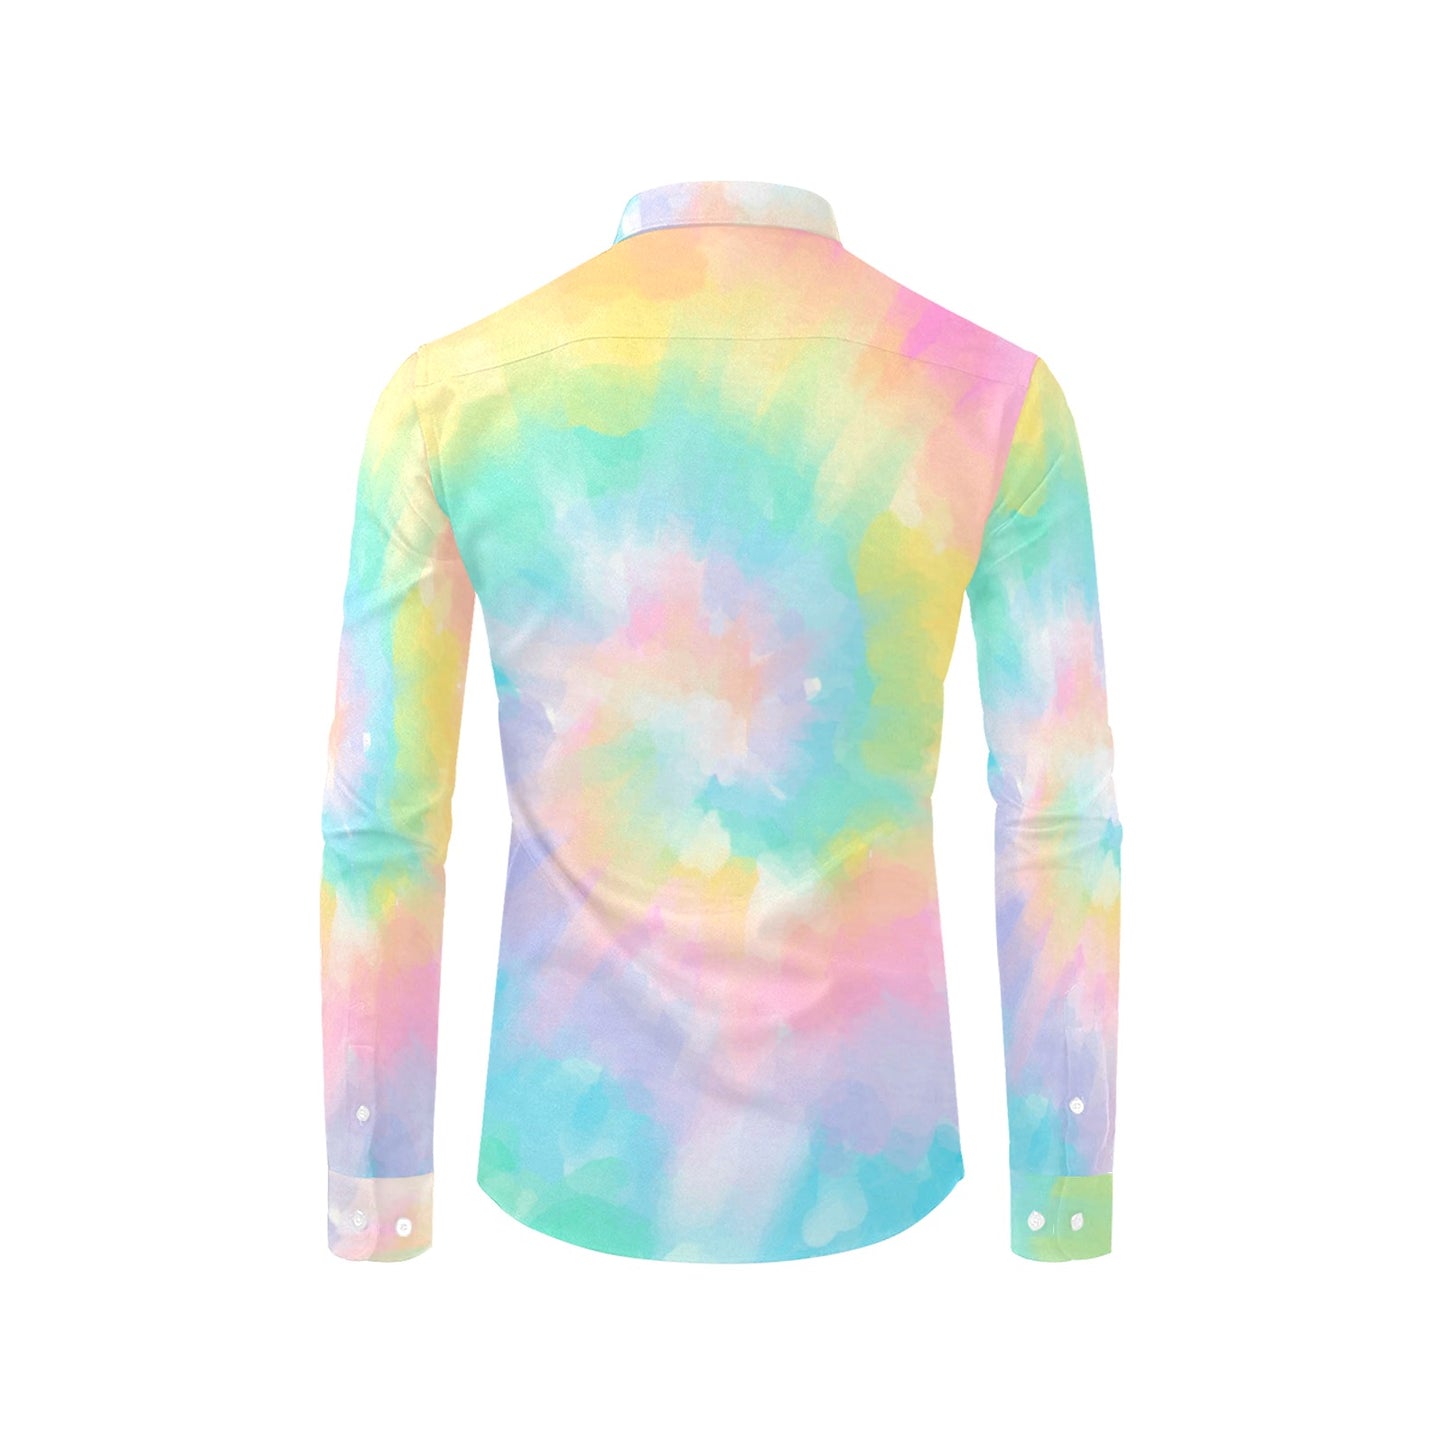 Pastel Tie Dye Long Sleeve Men Button Up Shirt, Rainbow Groovy Spiral Print Buttoned Collared Casual Dress Shirt with Chest Pocket Starcove Fashion